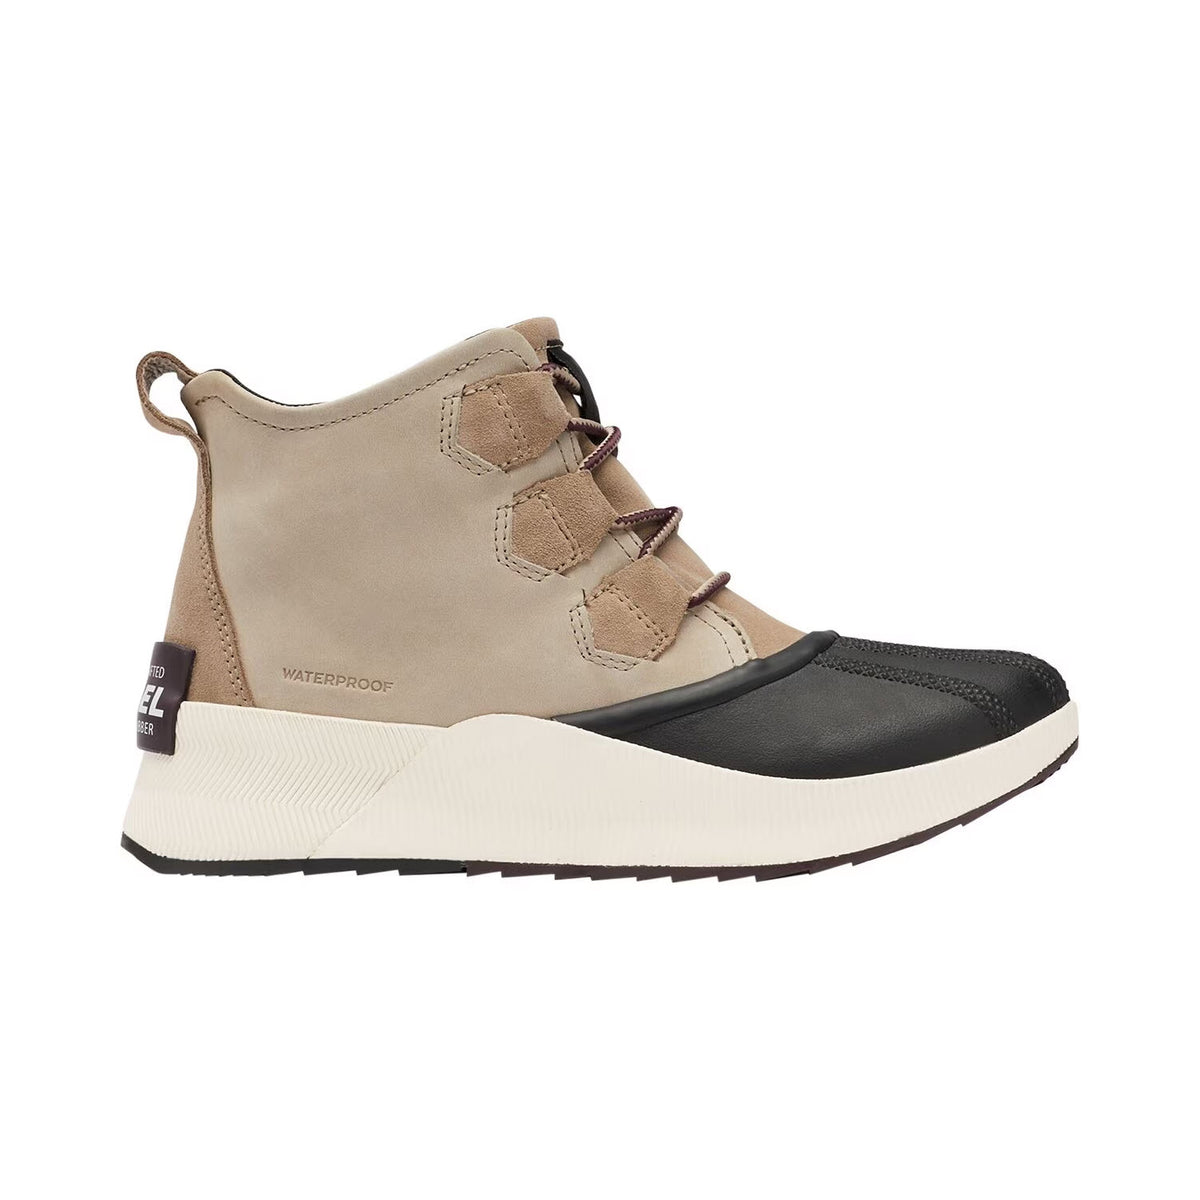 Beige and black waterproof boot with hook and loop strap closure, enhanced traction, and a chunky white sole, isolated on a white background. 
Product Name: SOREL OUT N ABOUT III CLASSIC OMEGA TAUPE - WOMENS 
Brand Name: Sorel